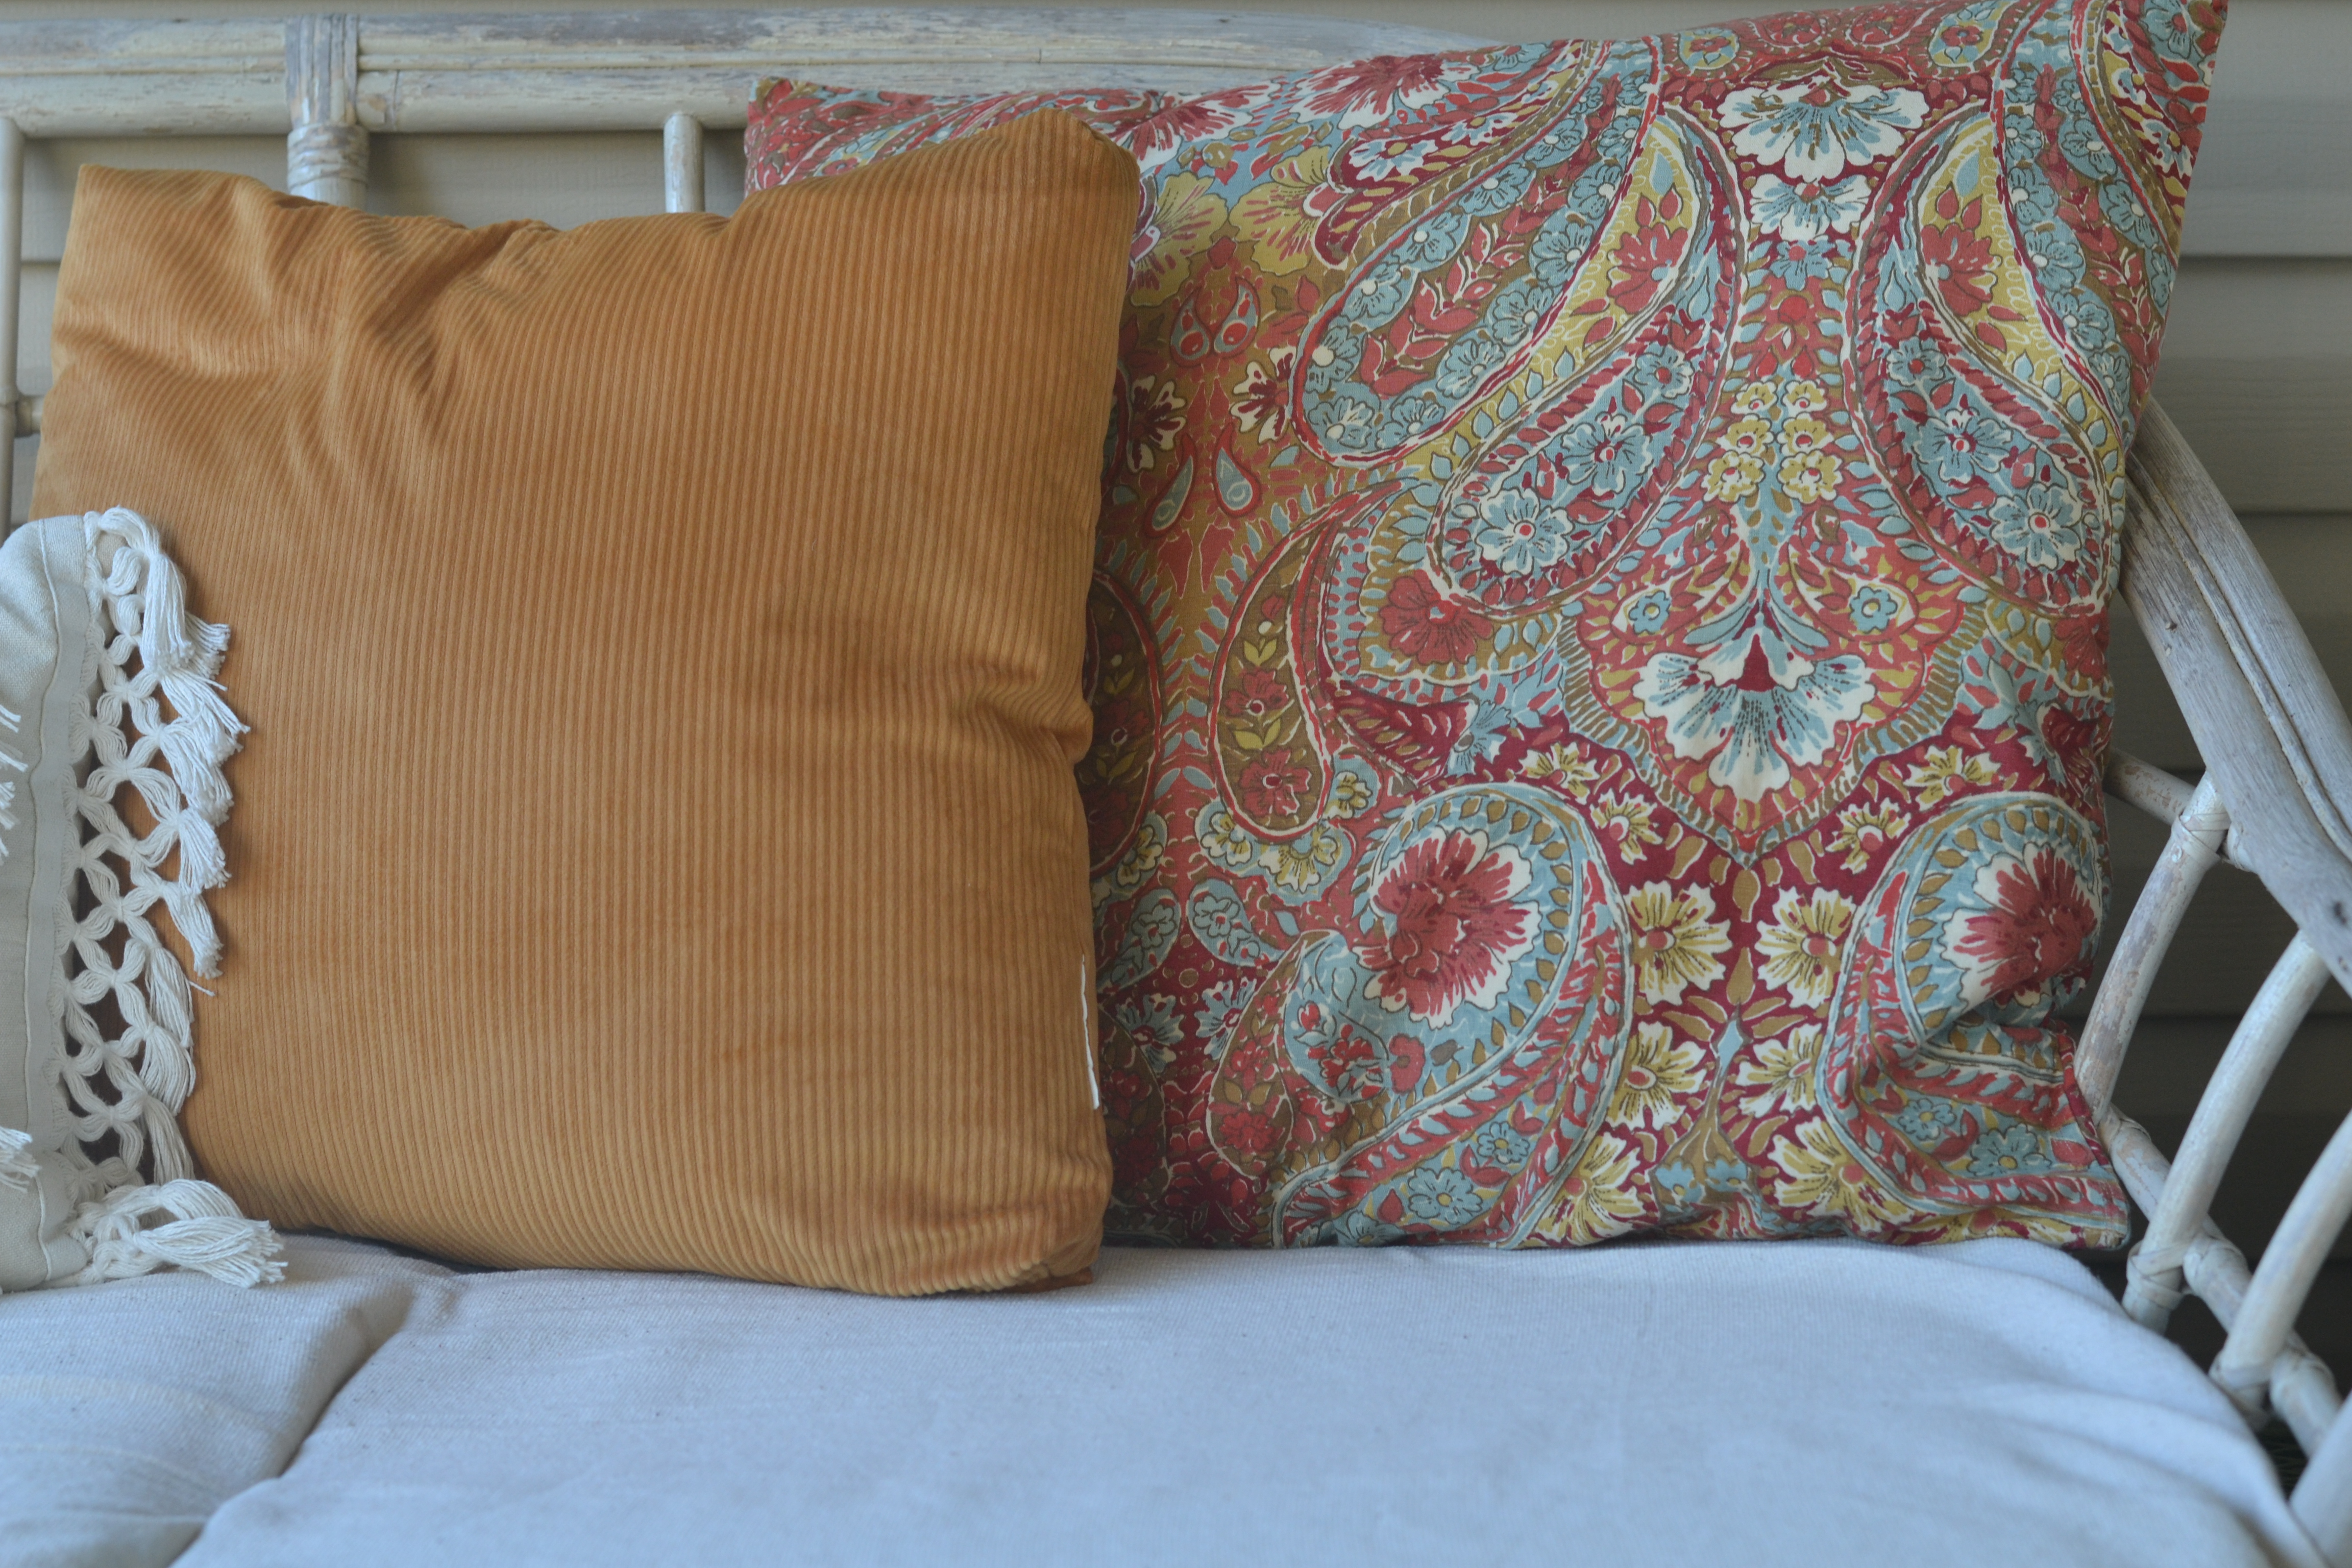 Adding fall inspired pillows